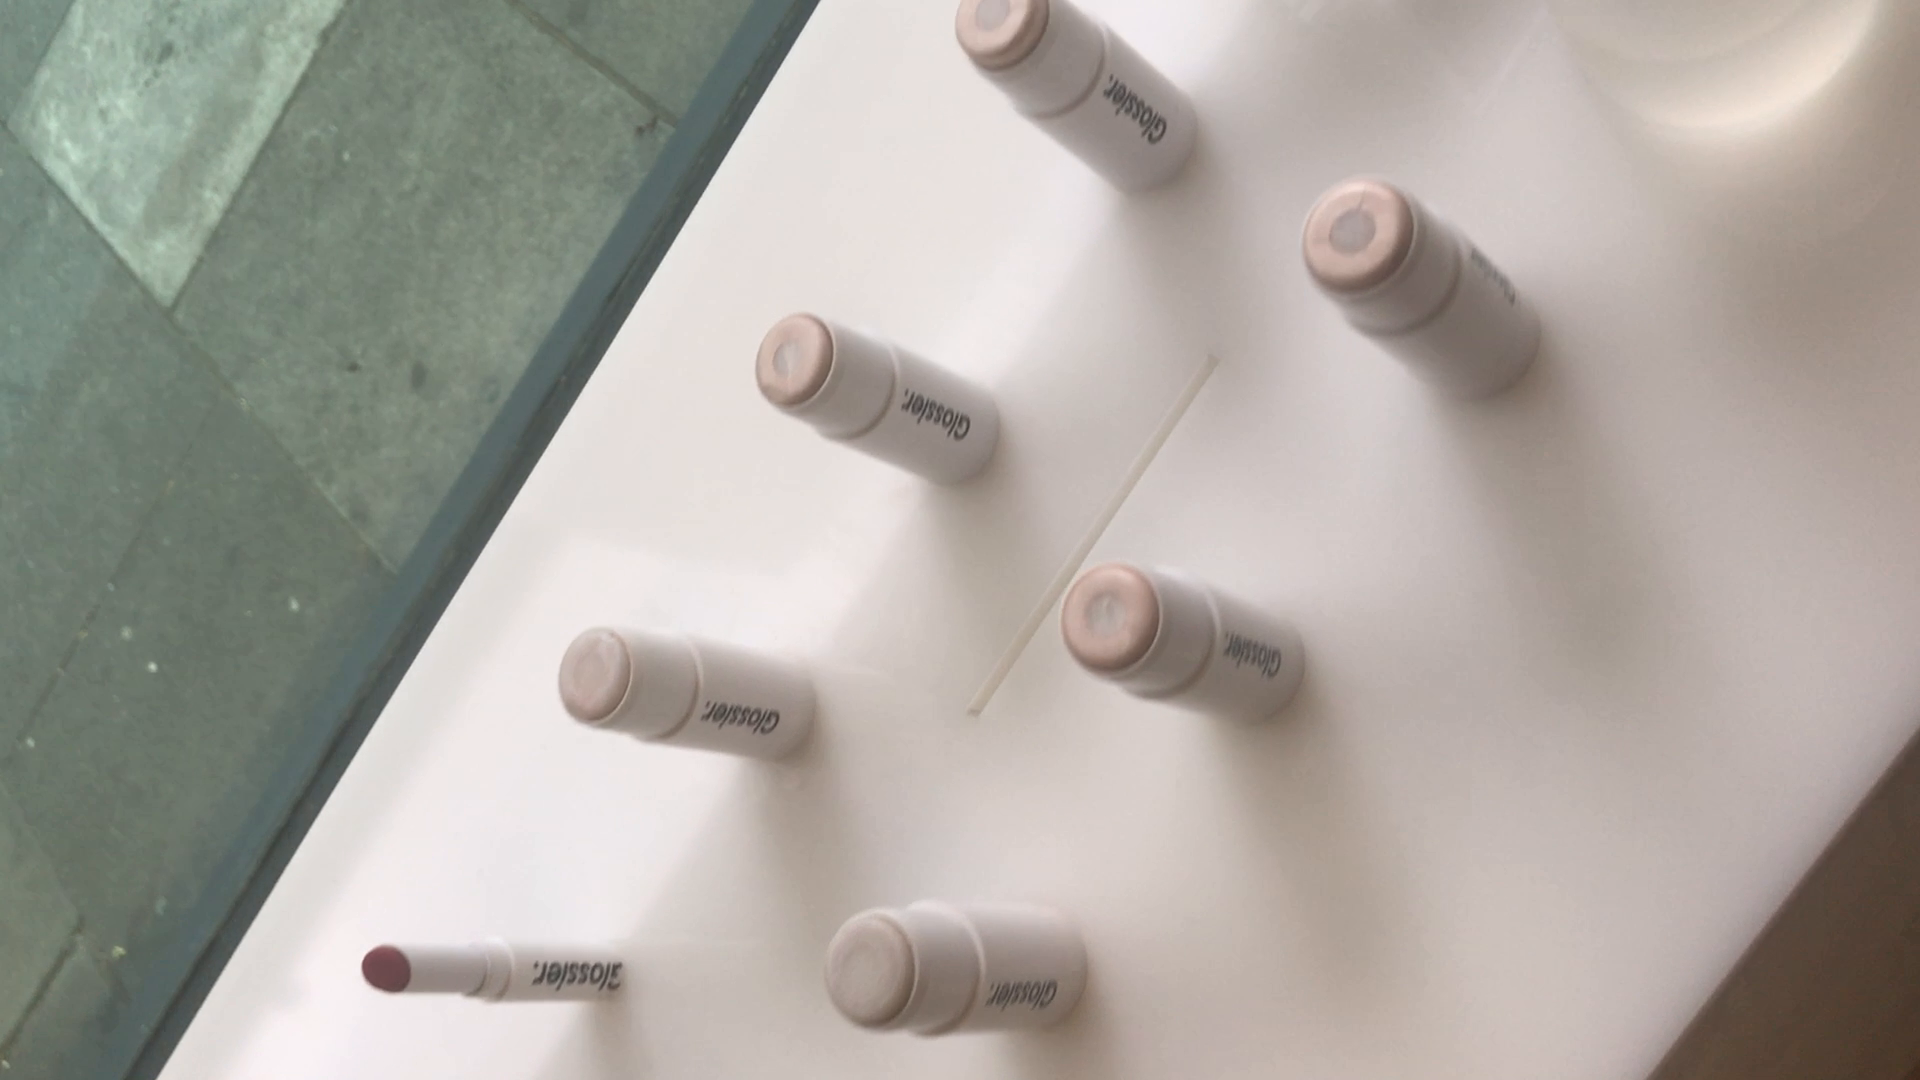 Glossier Launches Debut Fragrance 'You